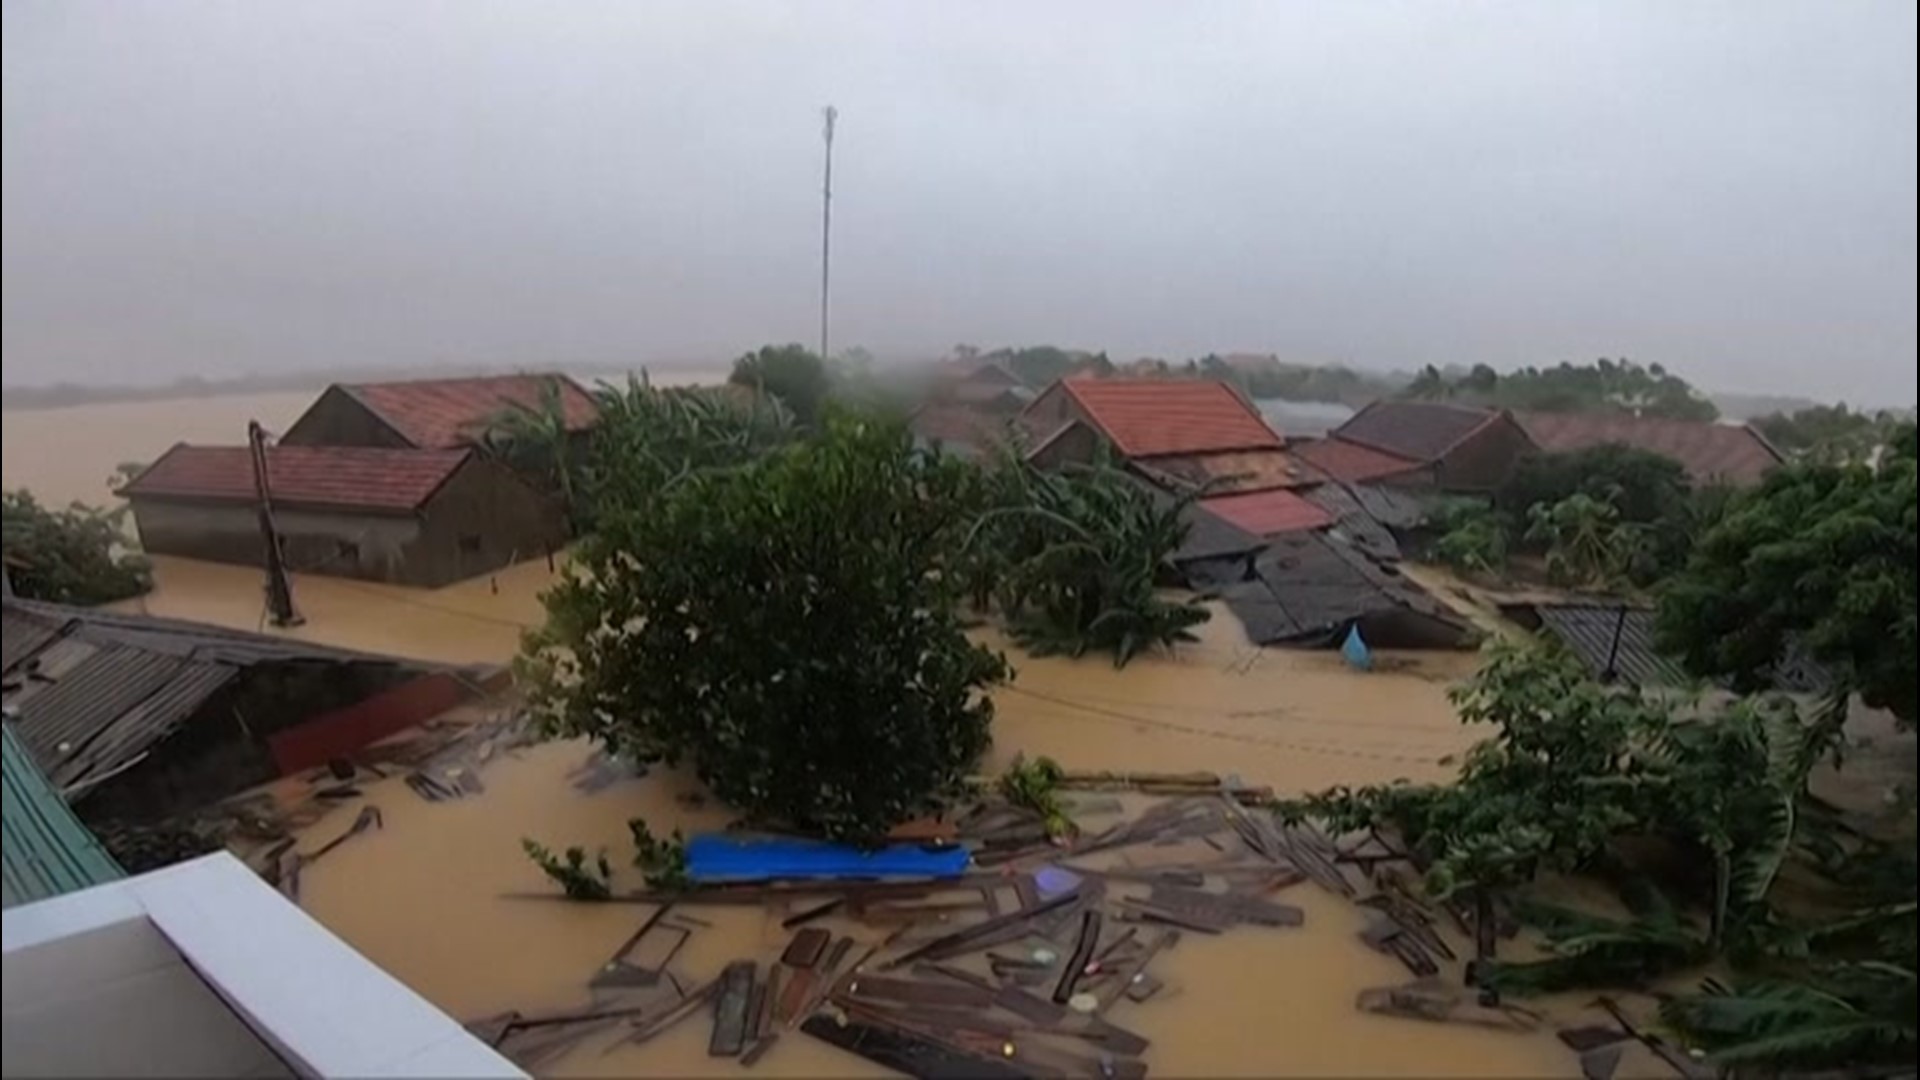 Parts of Vietnam were underwater on Oct. 20, as severe flooding and landslides continued to plague the country.  The area is now bracing for another storm that could hit the region this weekend.